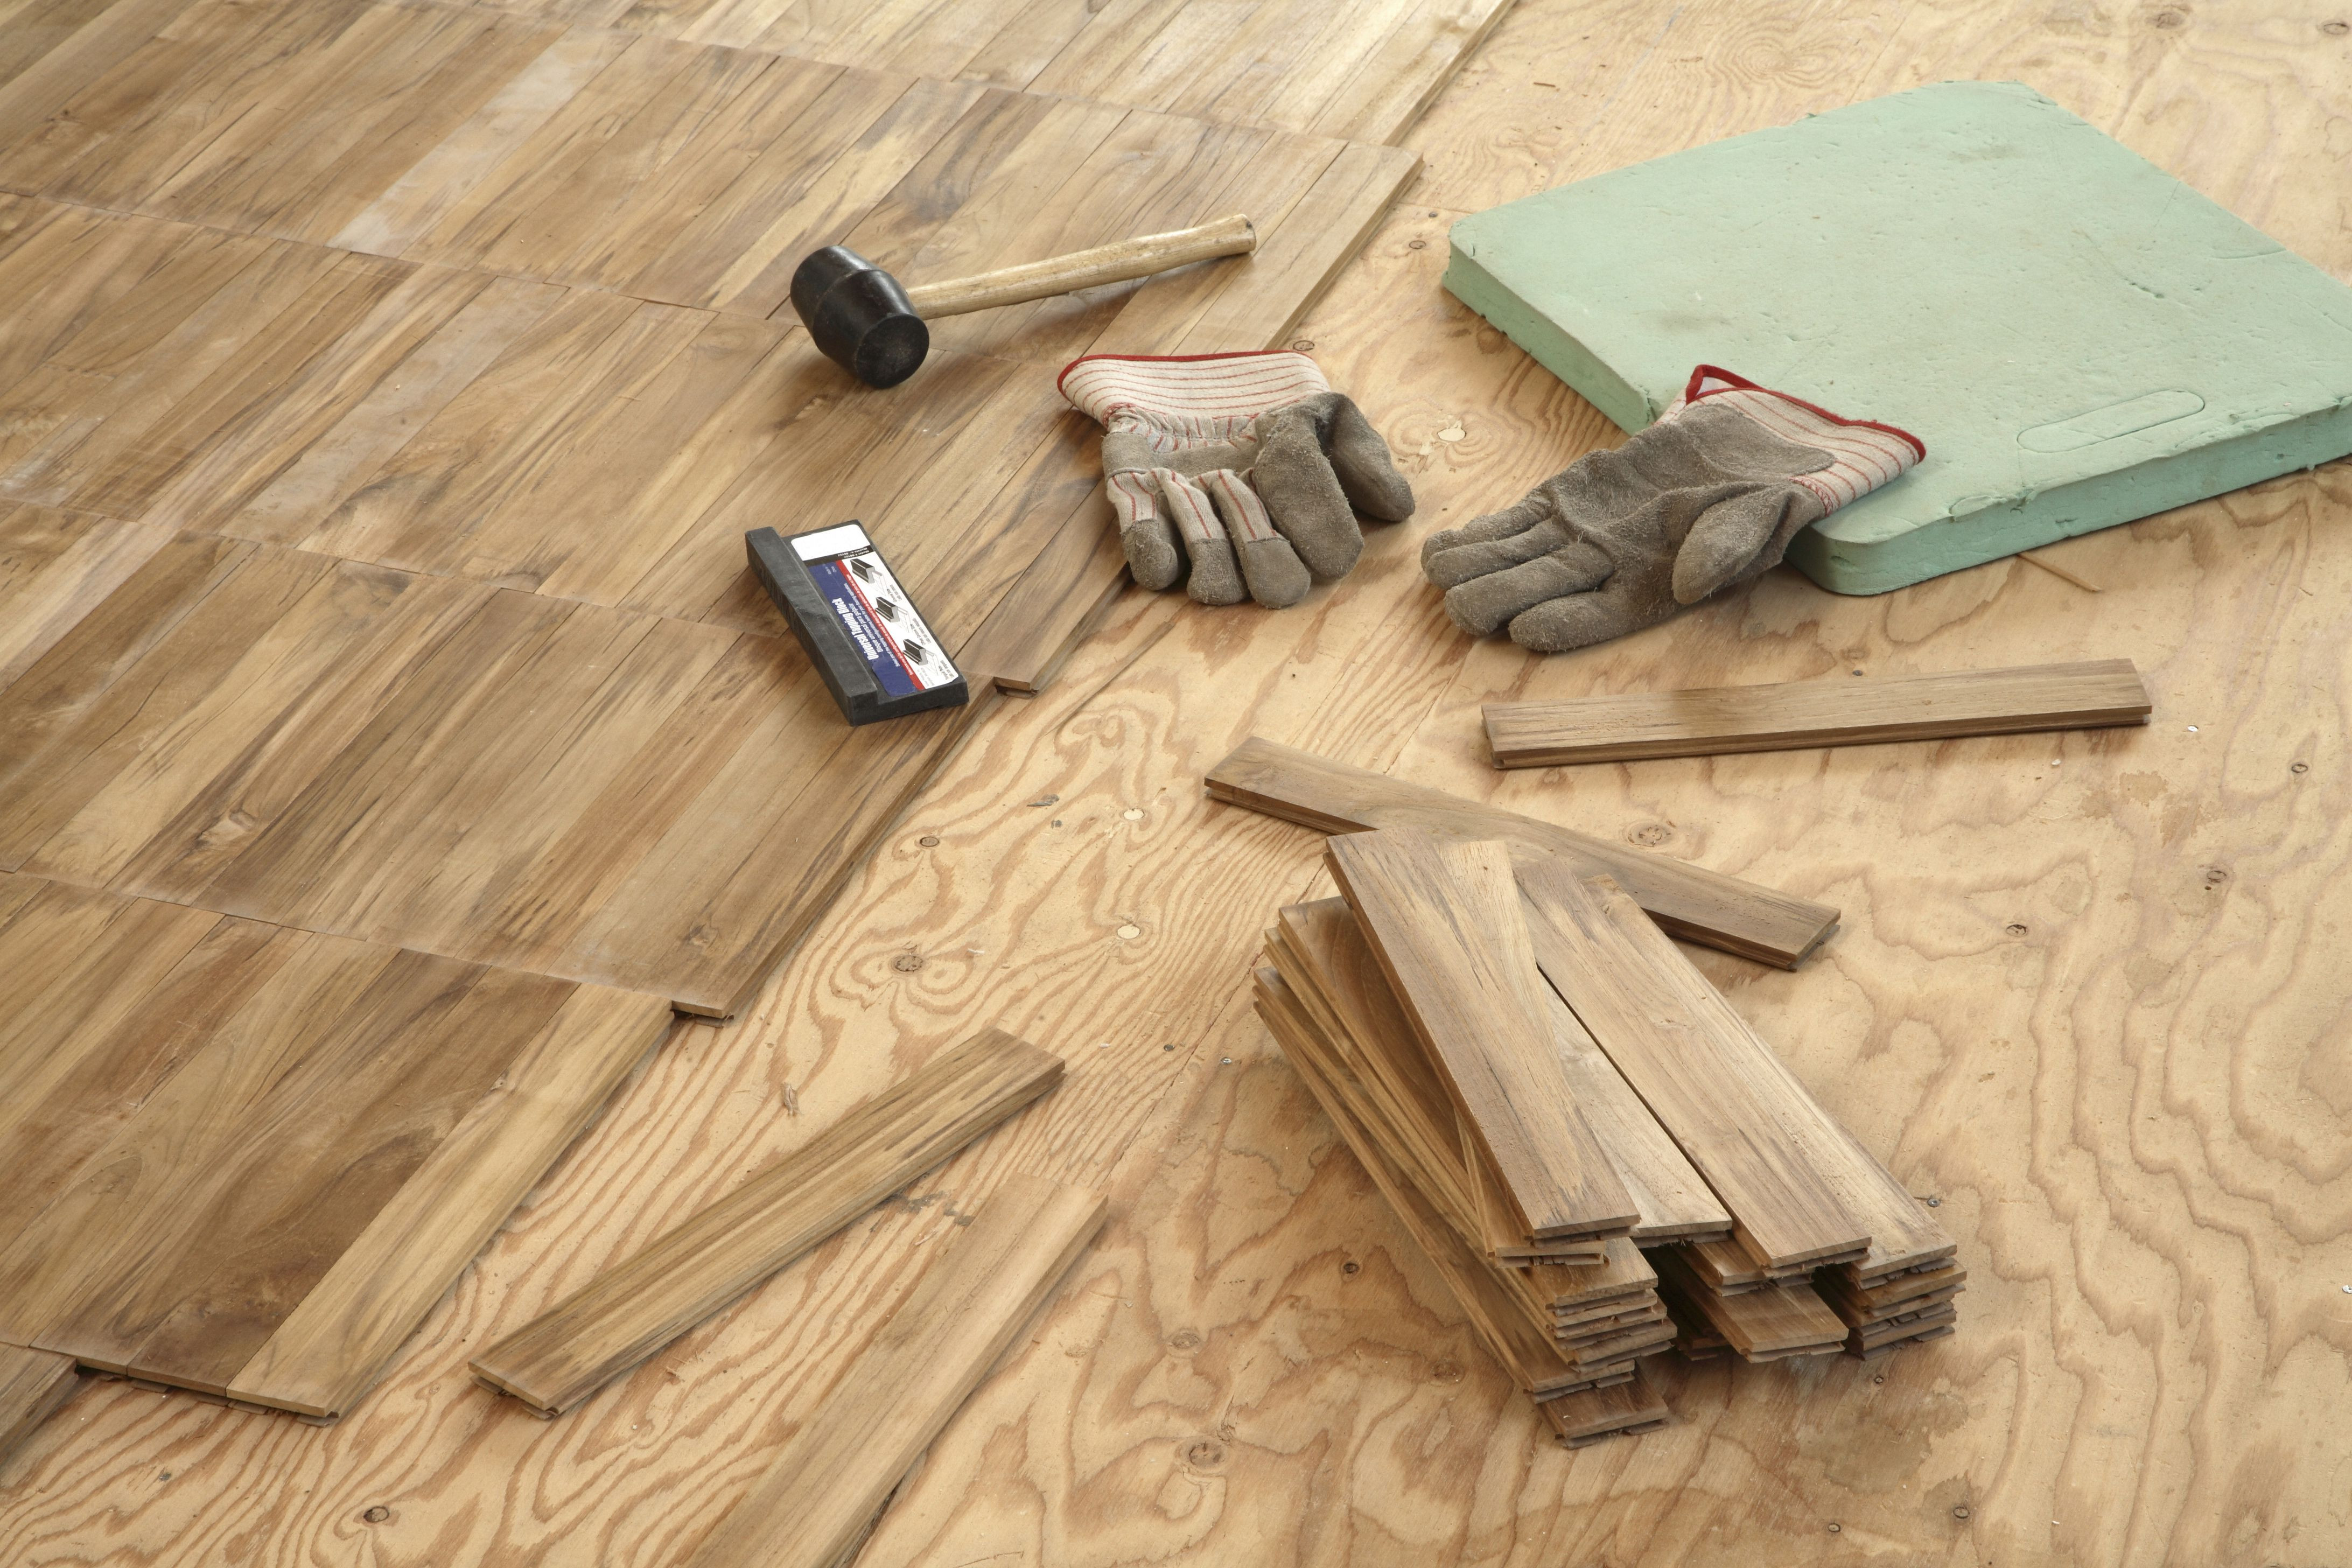 hardwood floor refinishing bowling green ky of plywood underlayment pros and cons types and brands pertaining to plywoodunderlaymentunderwoodflooring 5ac24fbcae9ab8003781af25